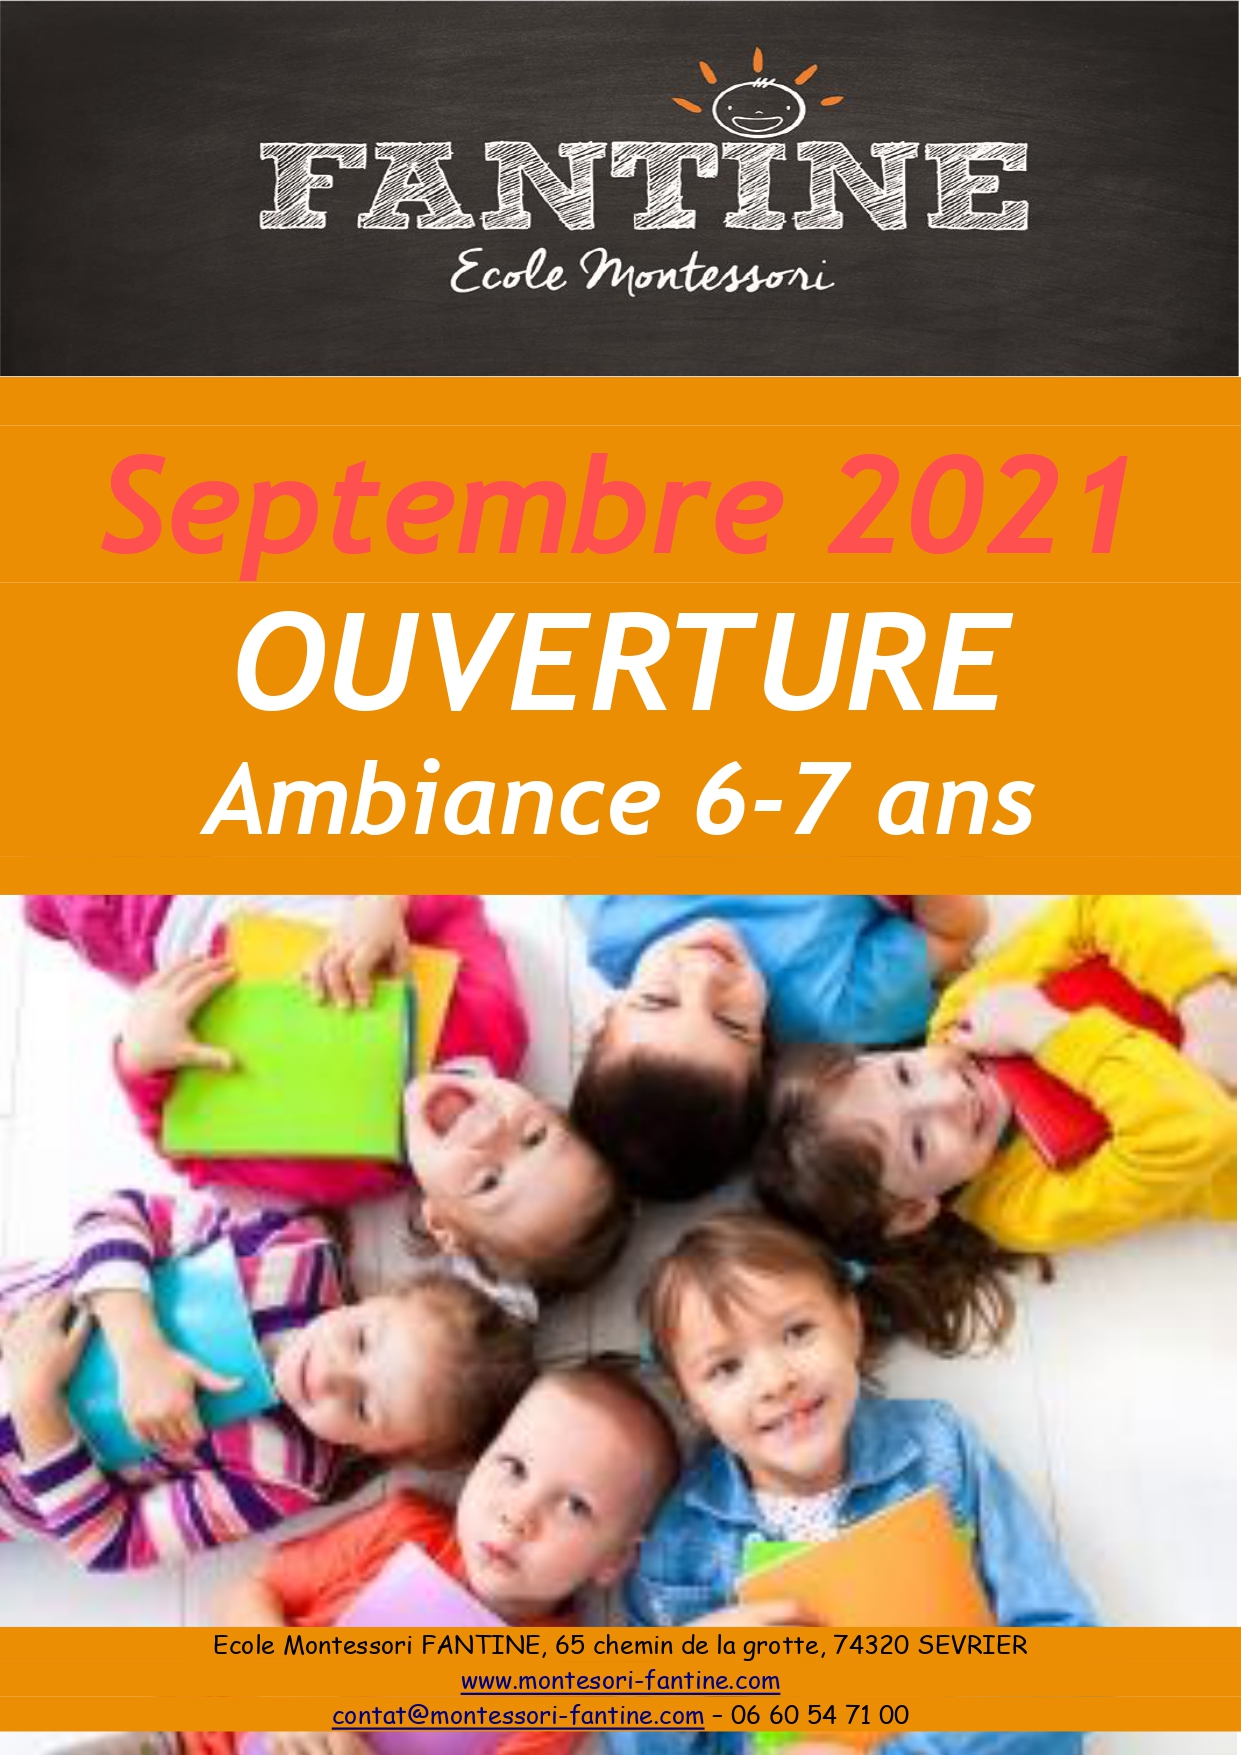 Ouverture Ambiance 6 7 ans page 0001 1